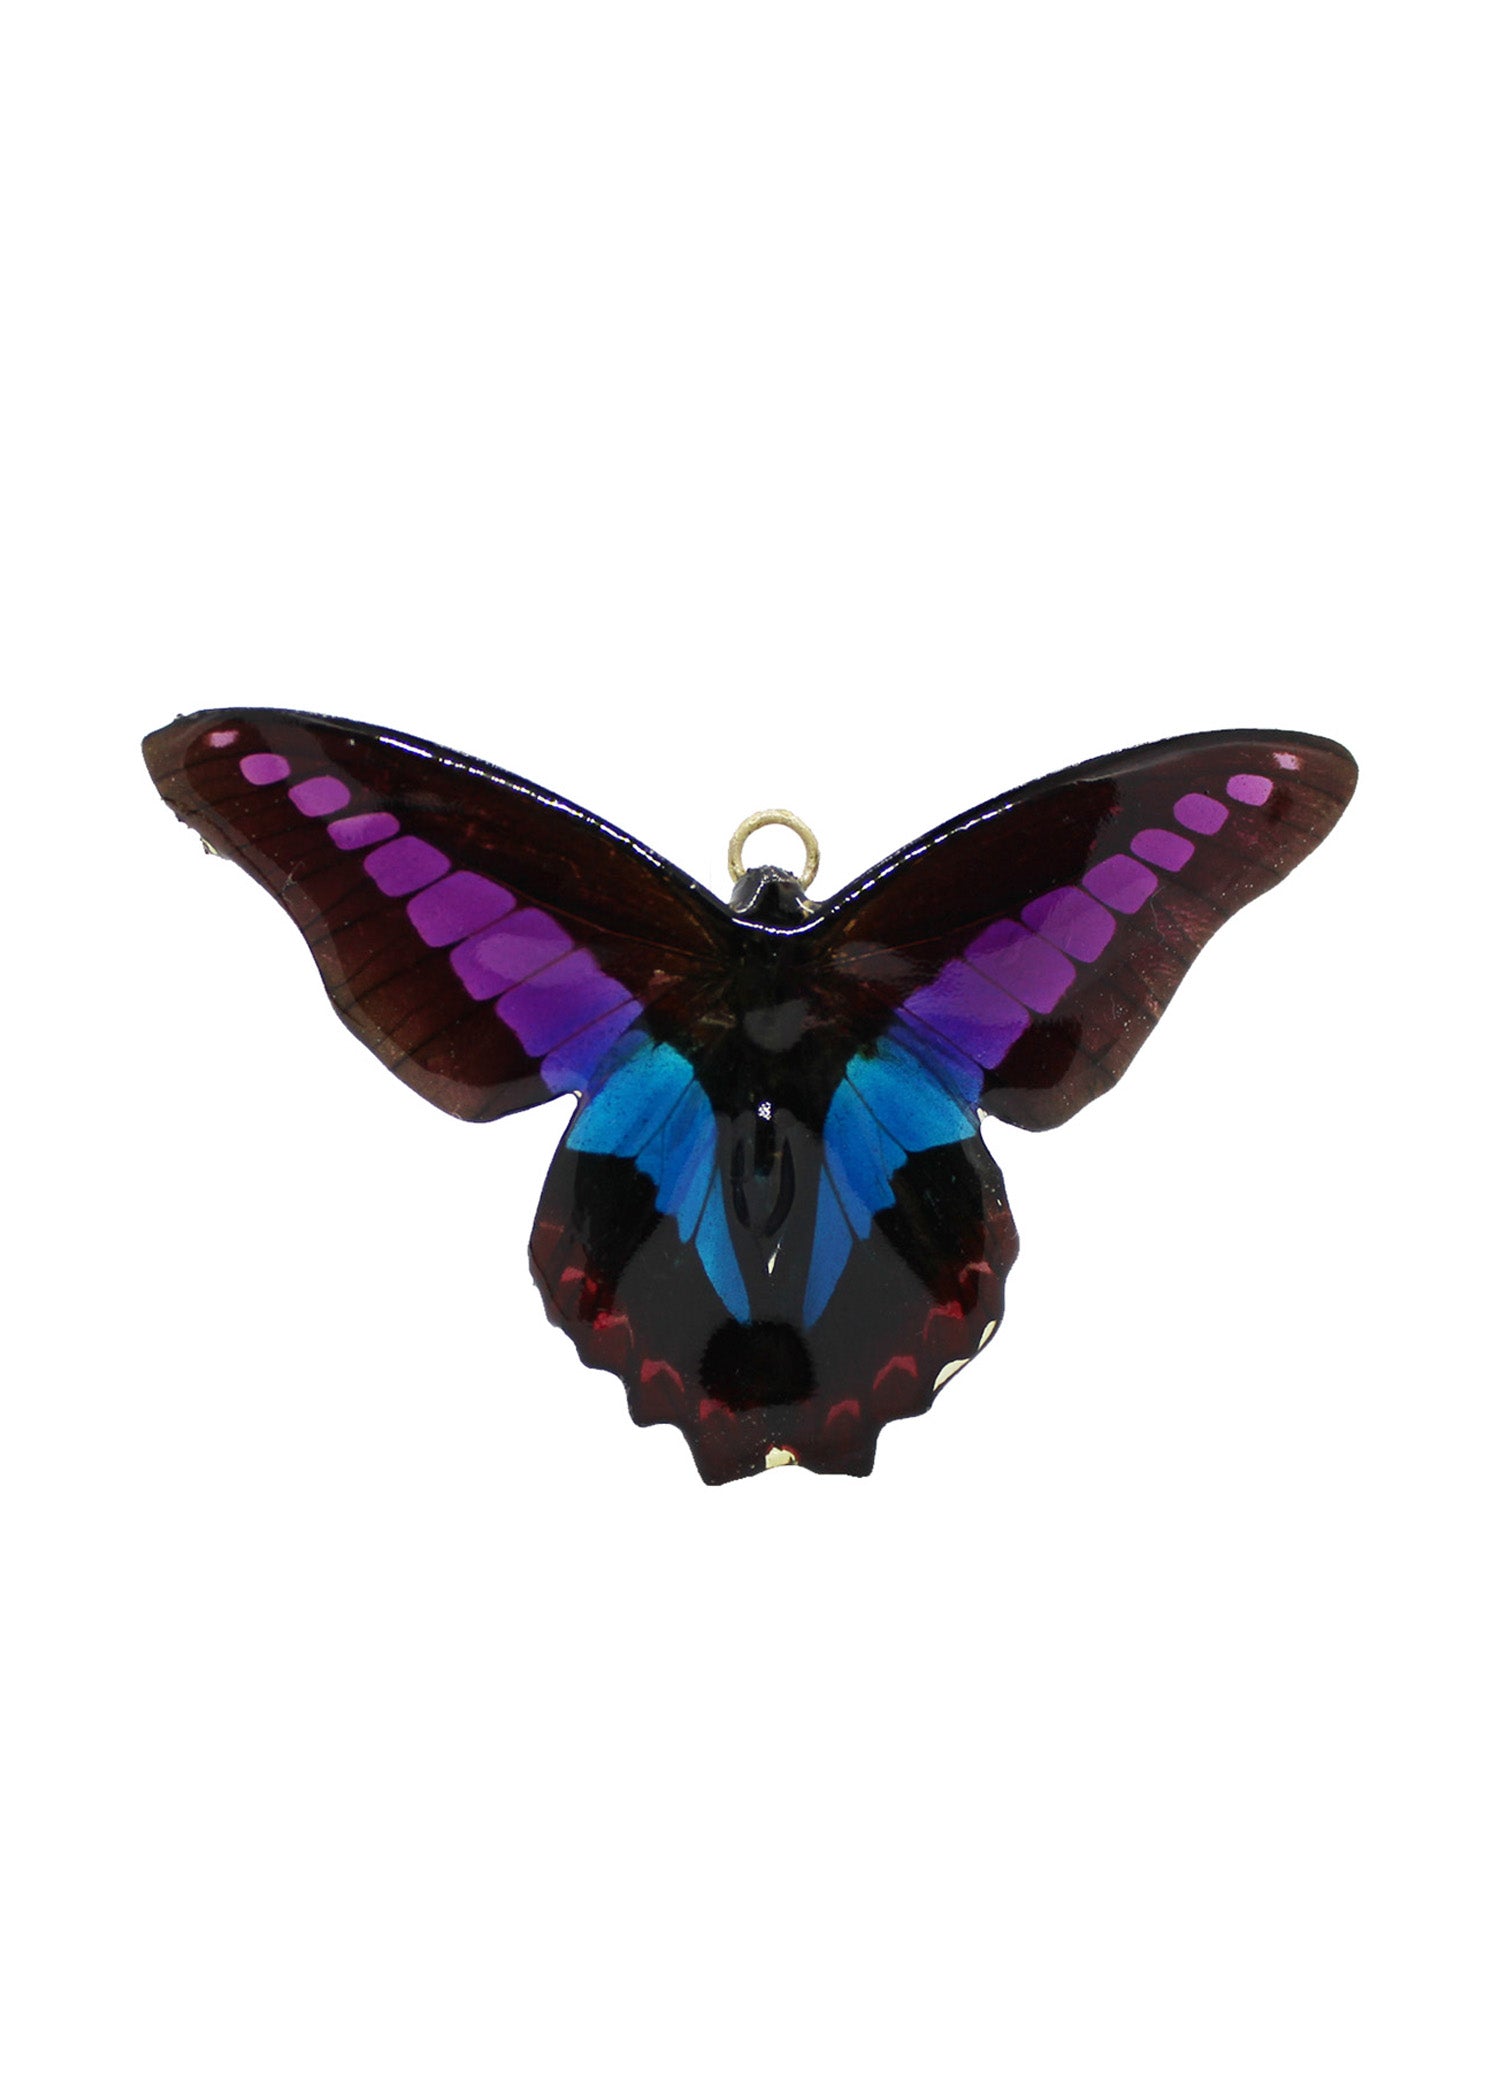 Purple, Blue, and Black butterfly preserved in resin.